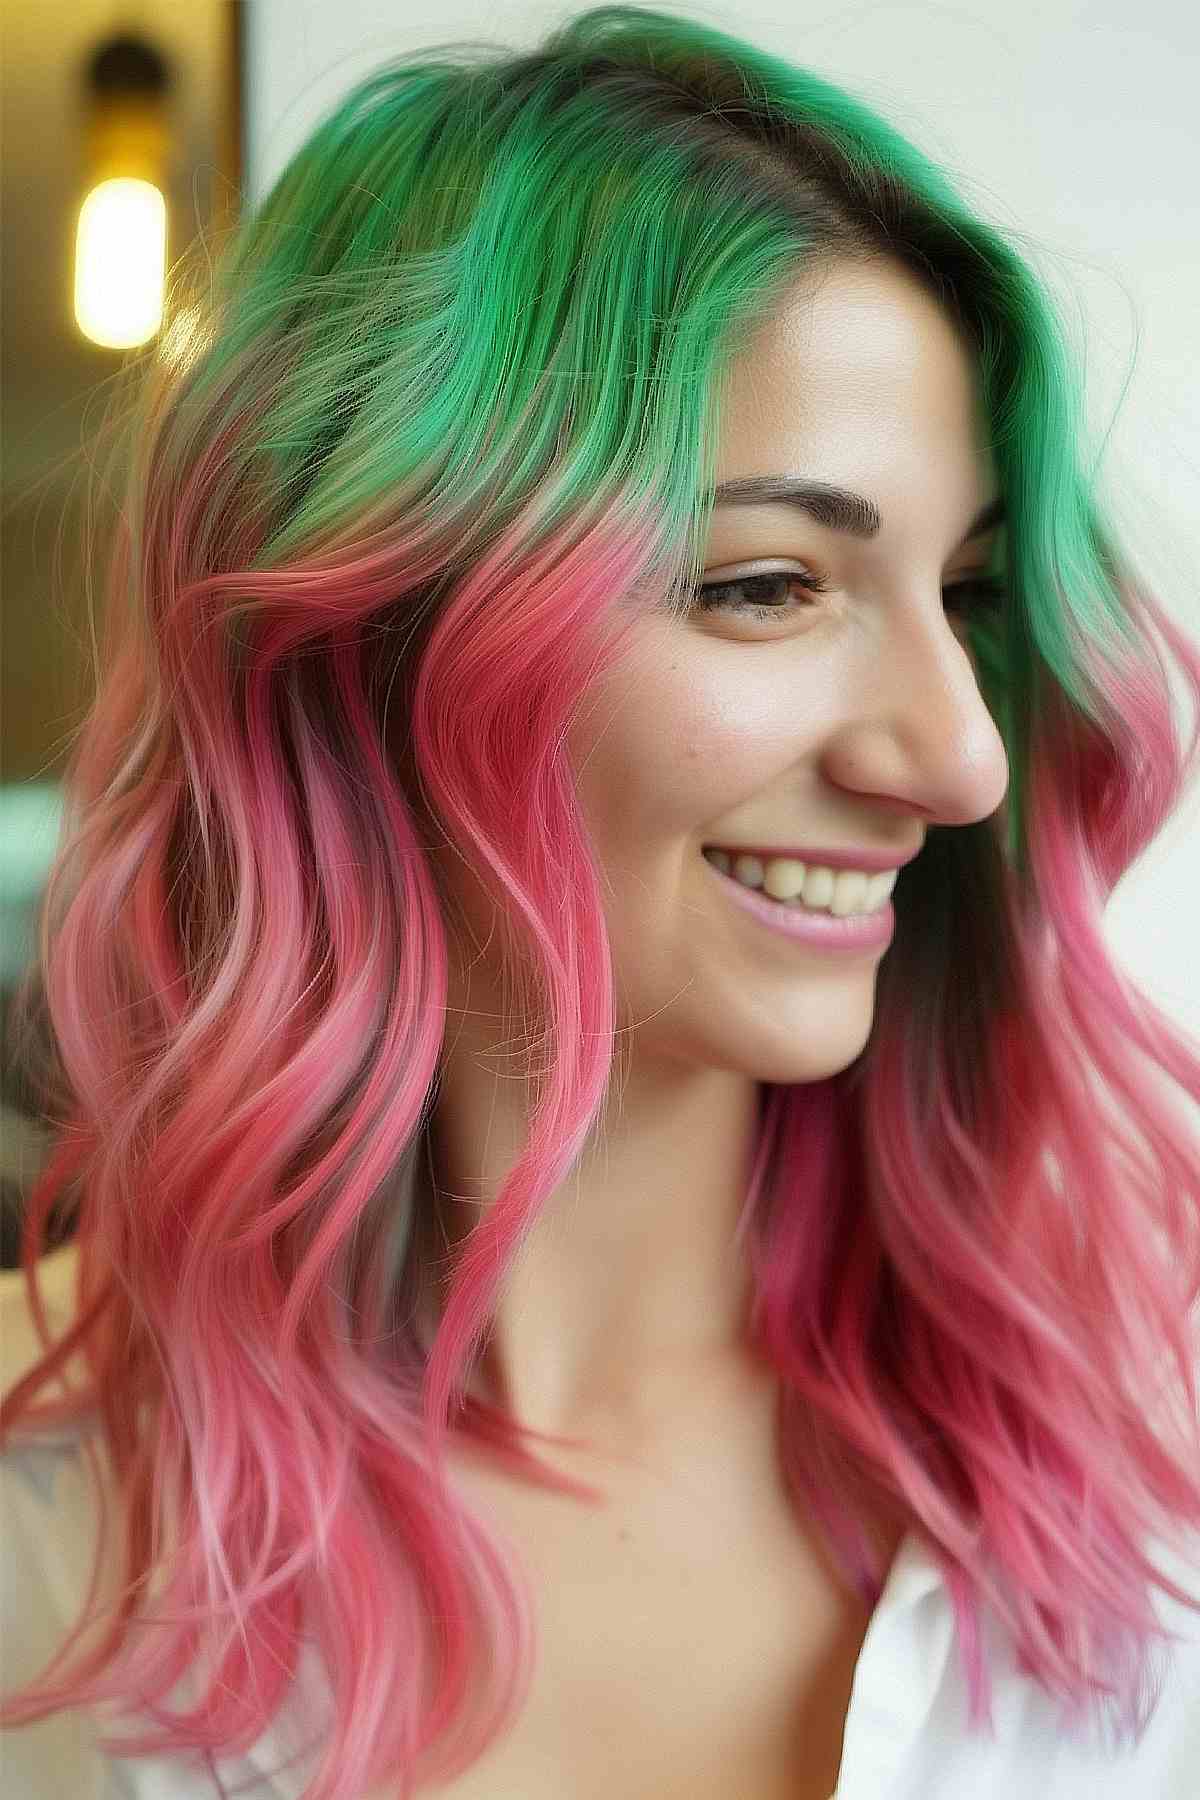 Medium-length wavy hair showcasing a unique color transition from green roots to pink lengths, offering a vibrant, playful look.